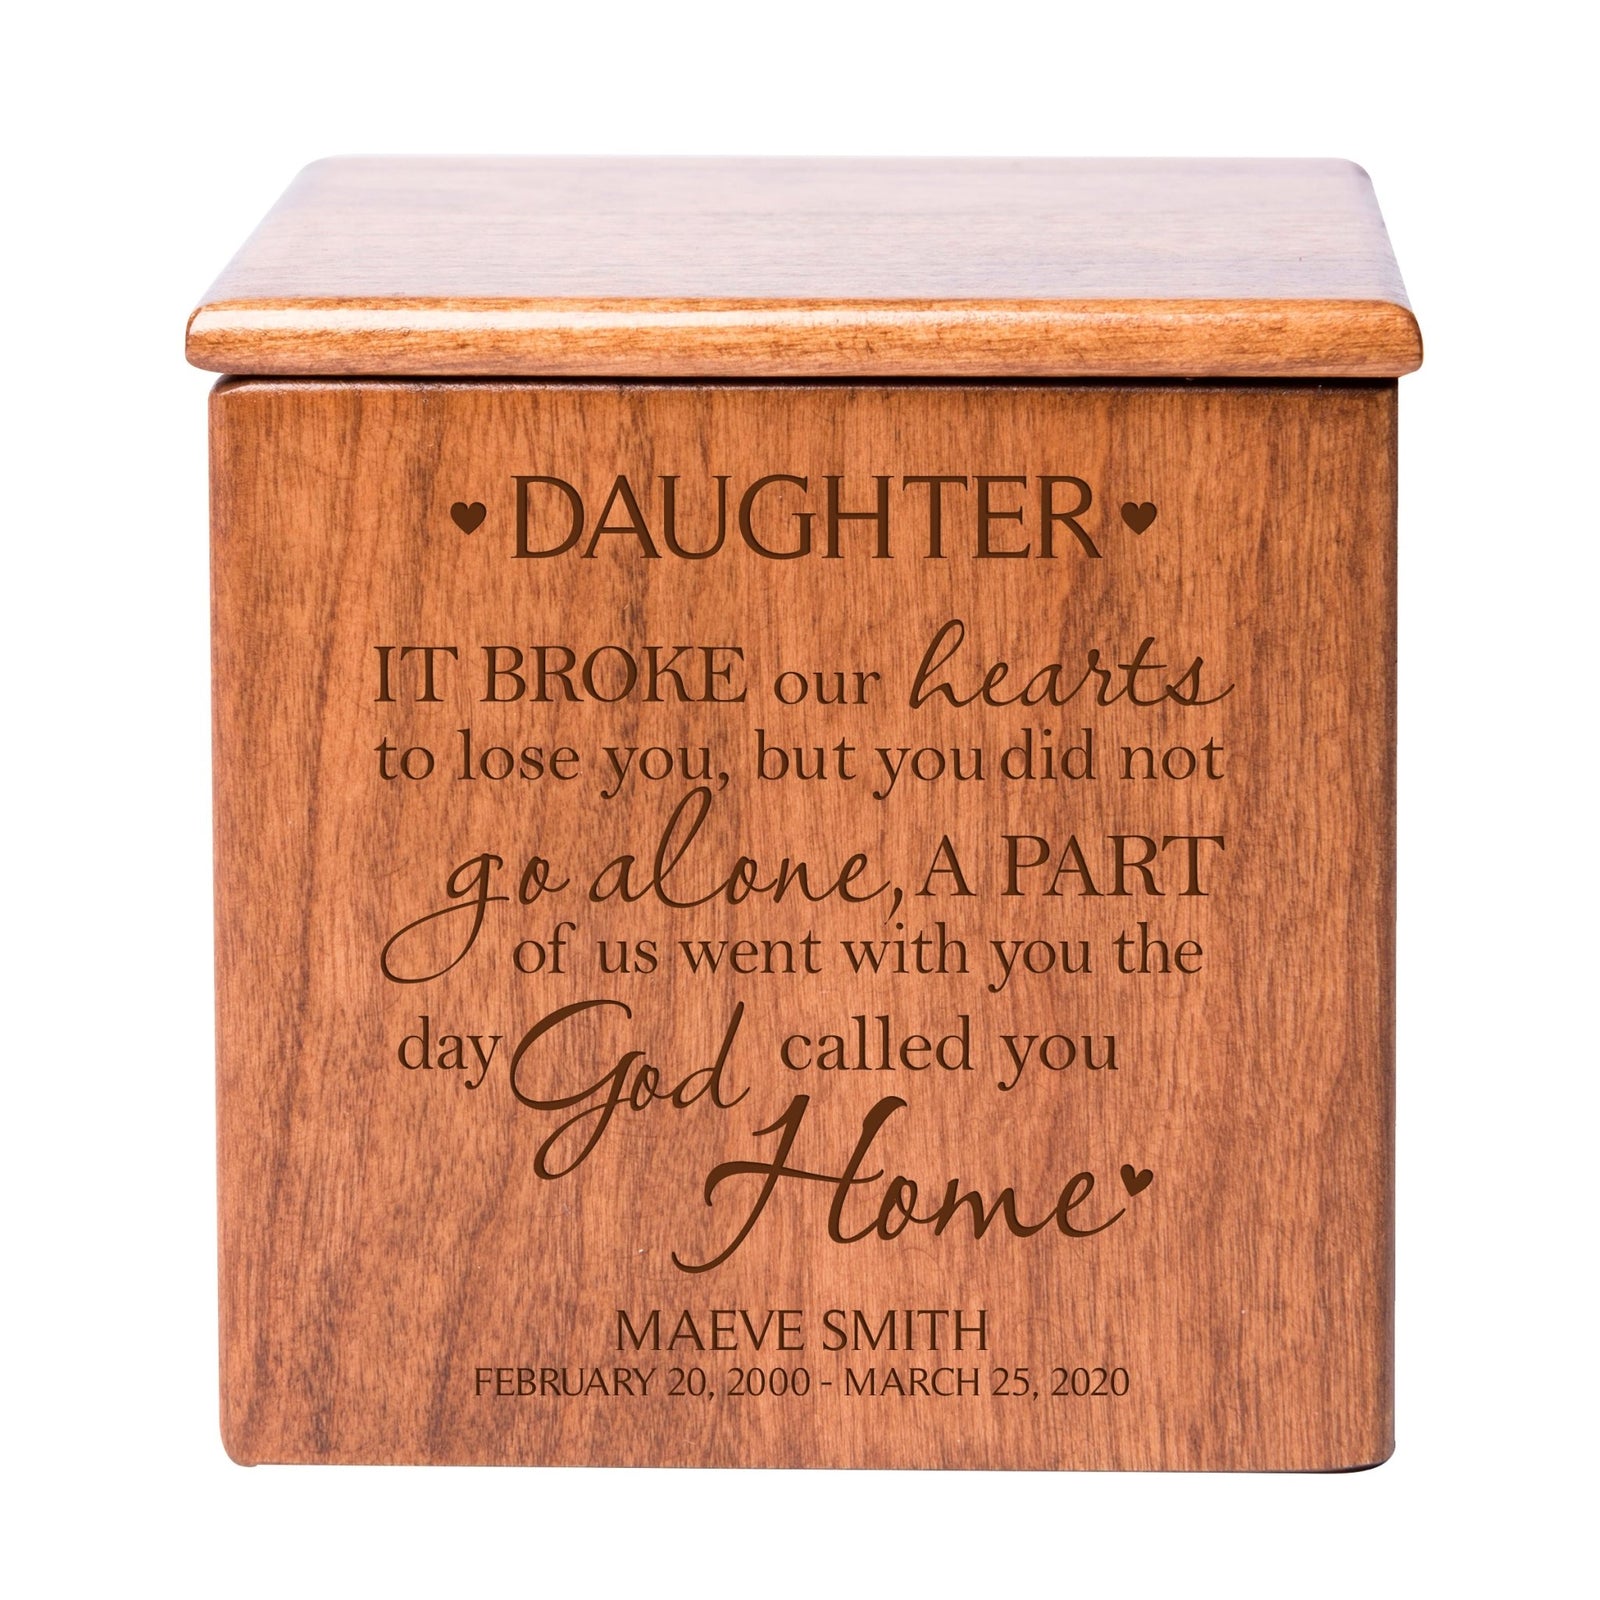 Custom Engraved Memorial Cremation Urn Box Holds 49 Cu Inches Of Human Ashes (It Broke Our Hearts Daughter) Funeral and Condolence Keepsake - LifeSong Milestones